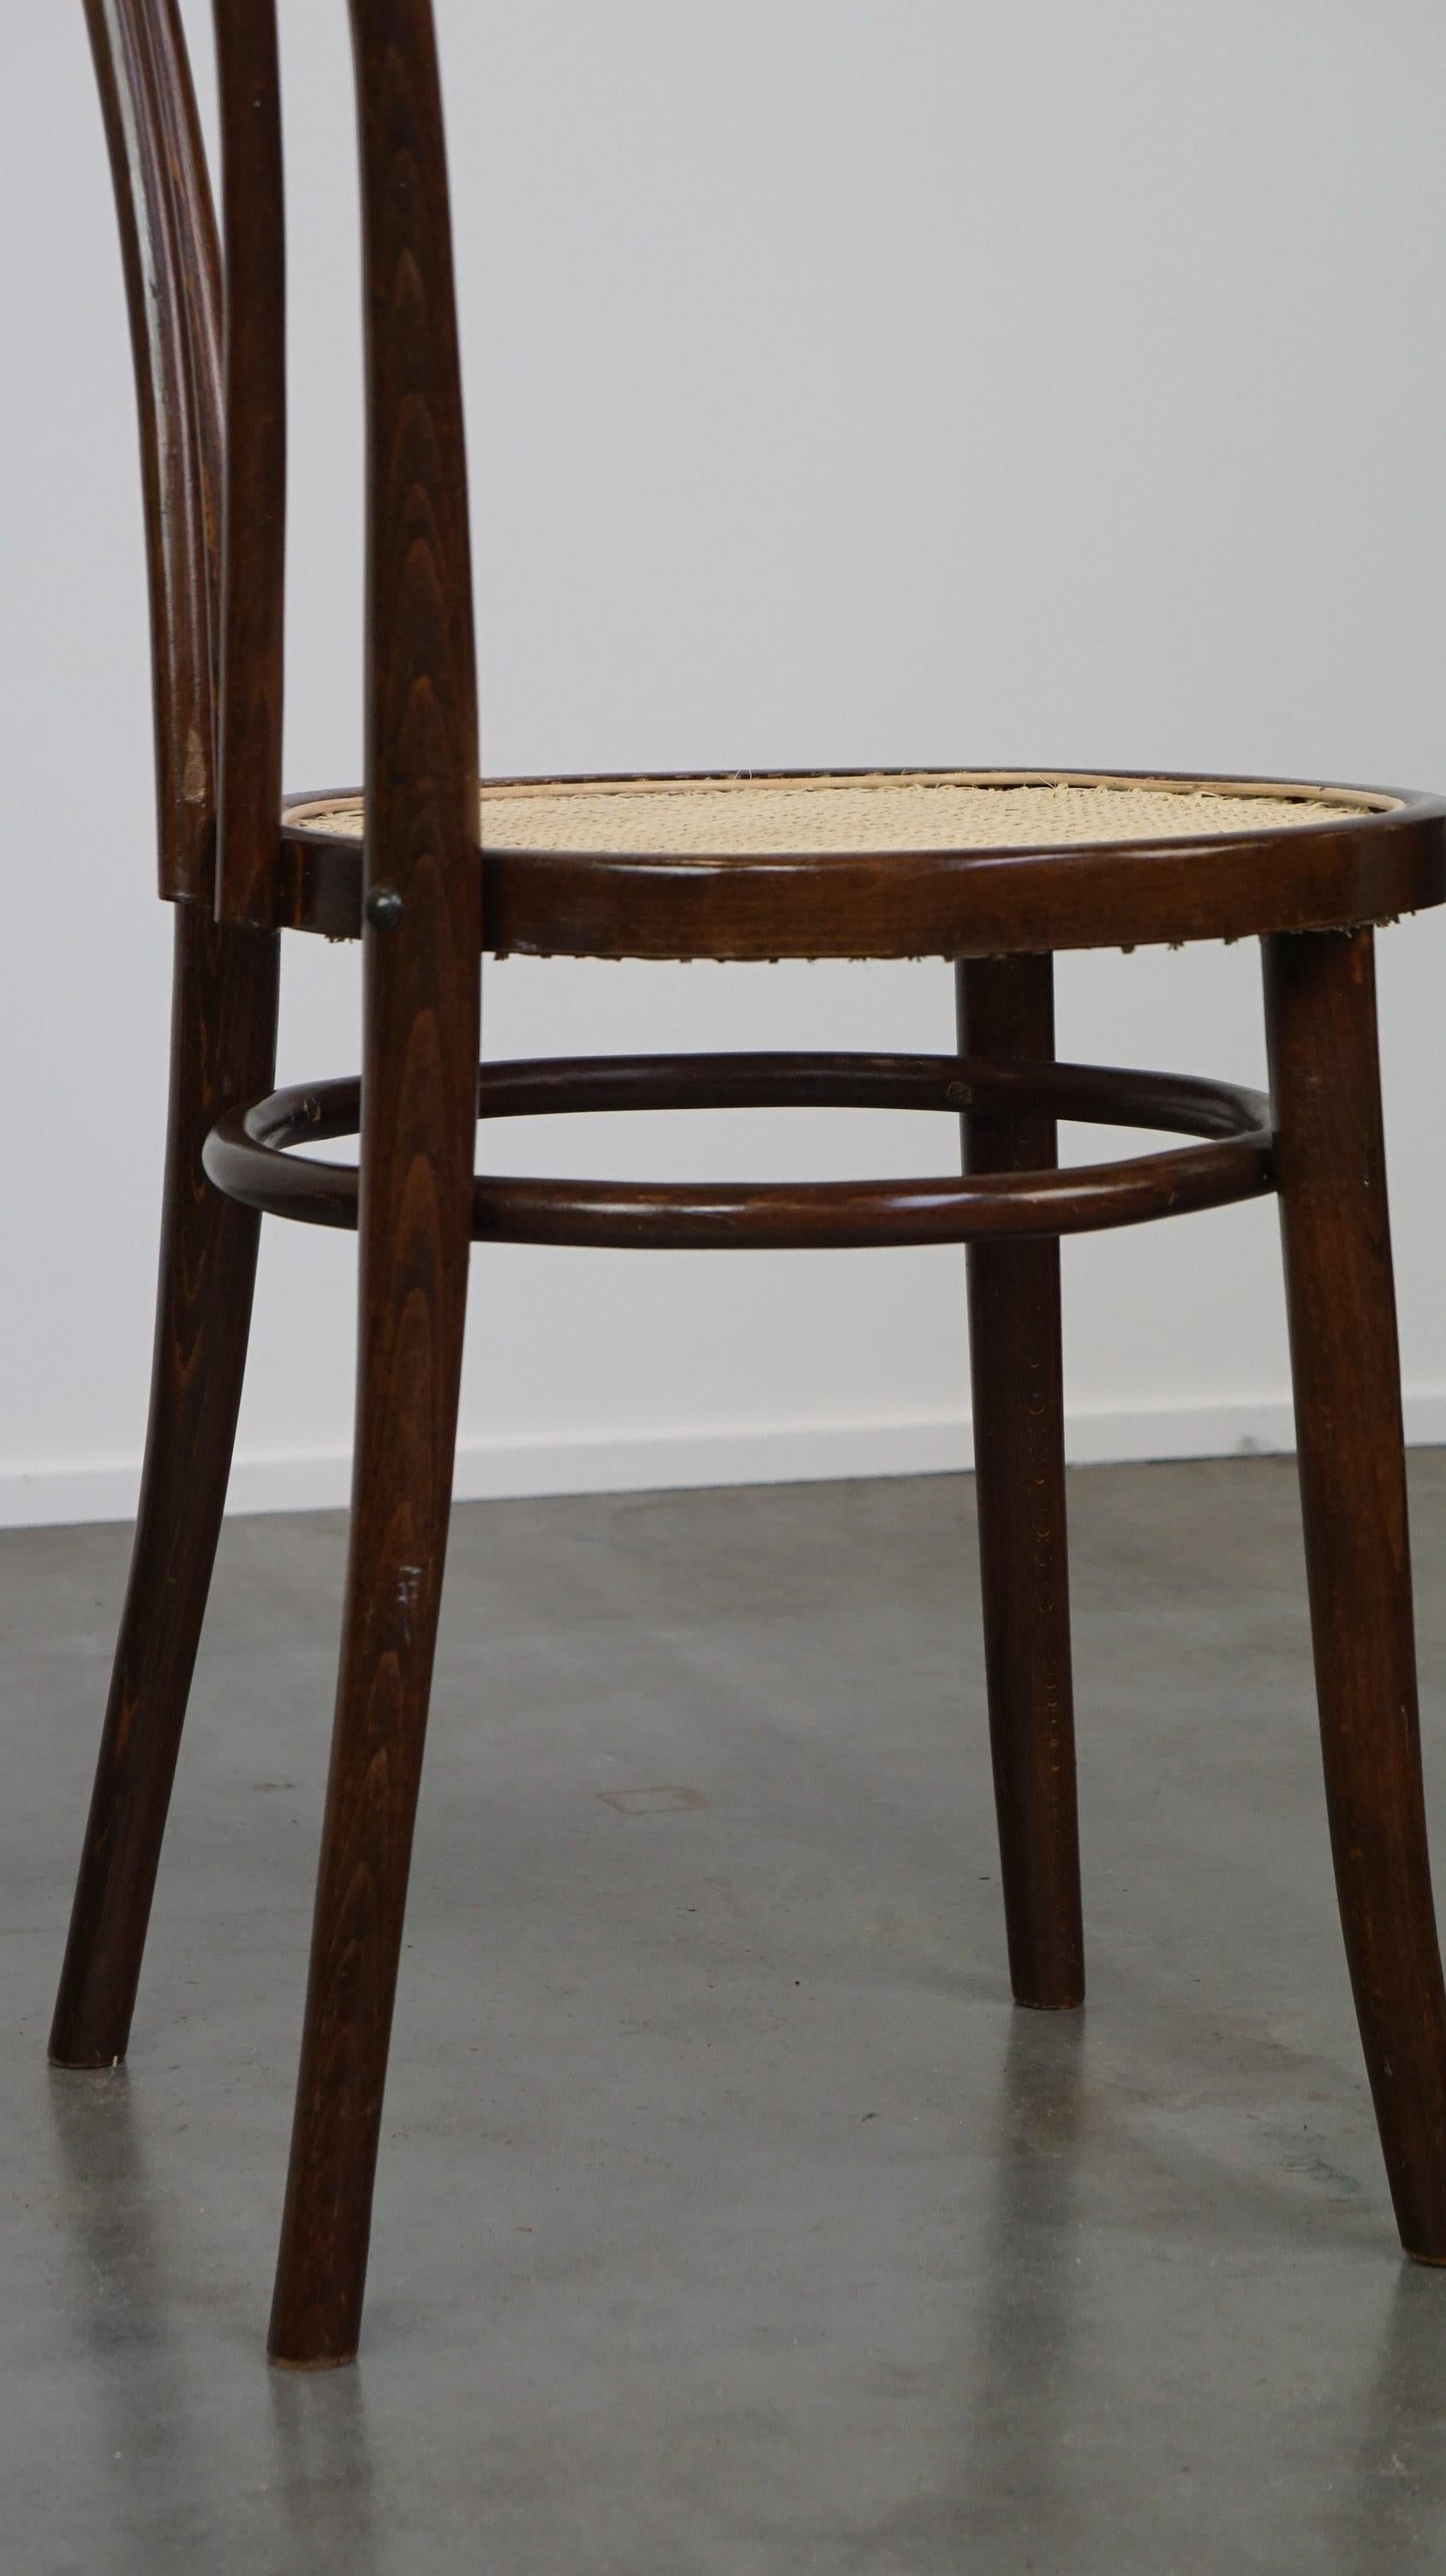 Original antique bentwood Thonet chair model no. 18 with a new woven seat For Sale 6